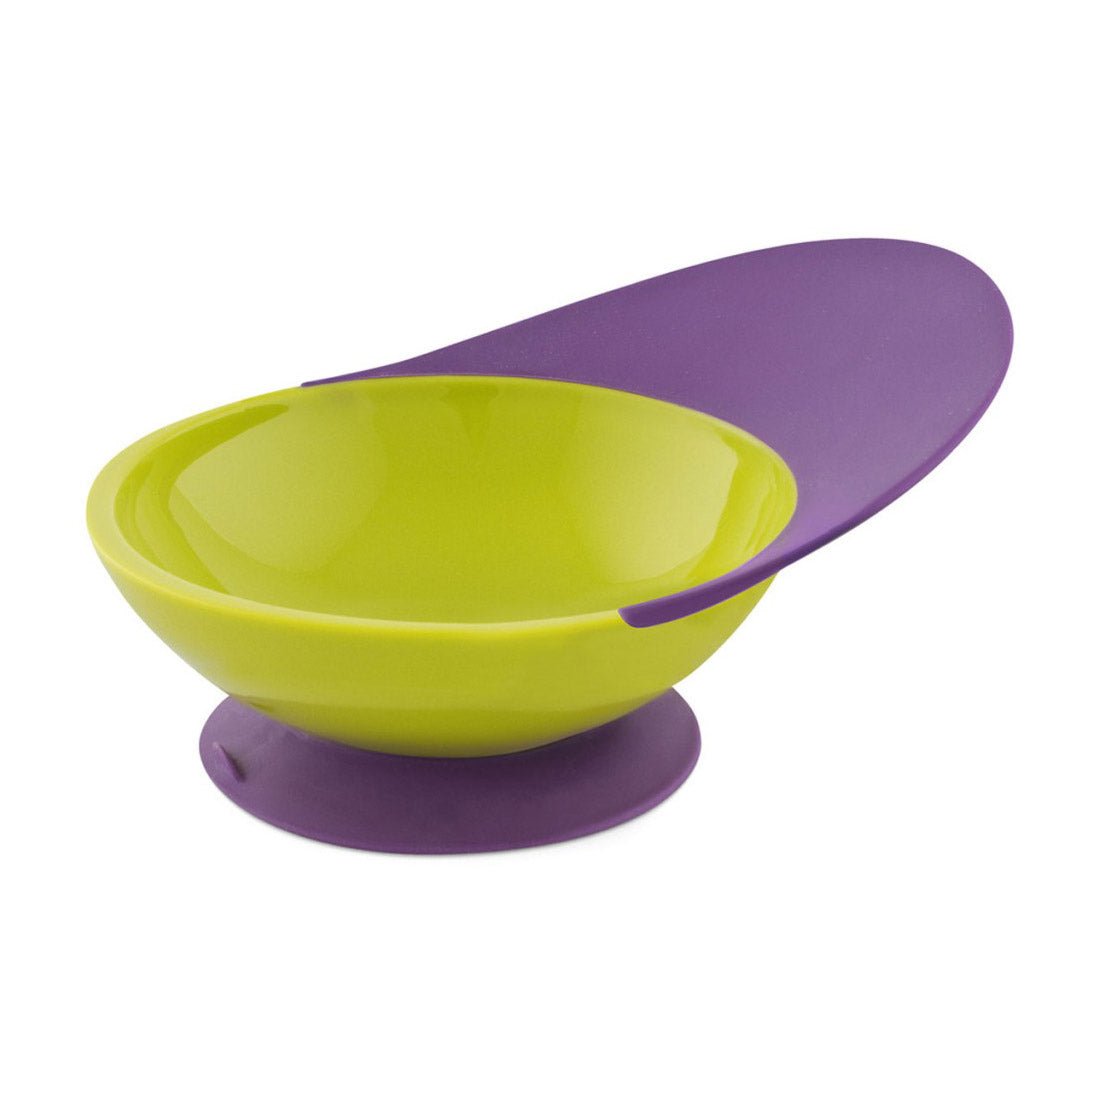 Boon Catch Bowl with Spill Catcher - Bloom Pharmacy